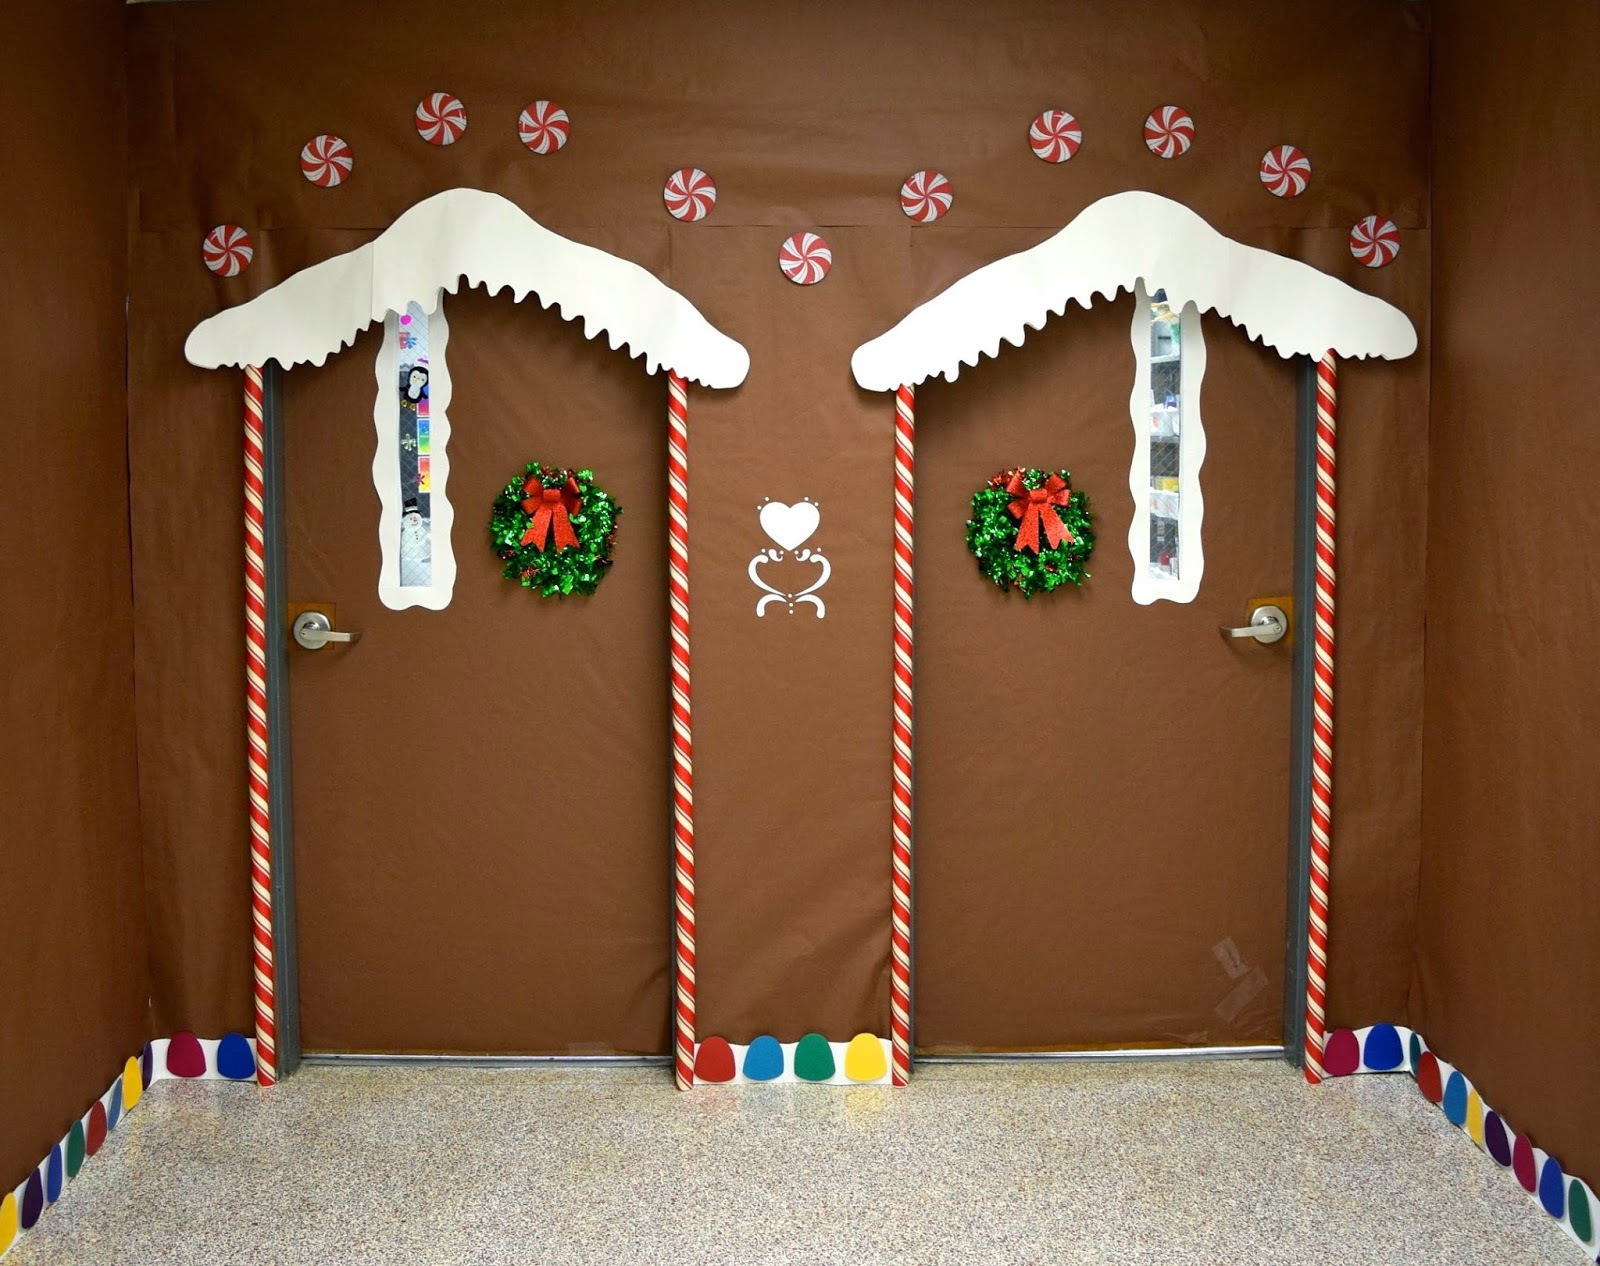 40+ Office Holiday Decorating Ideas for an Xmas Mood | Blog | Square Signs